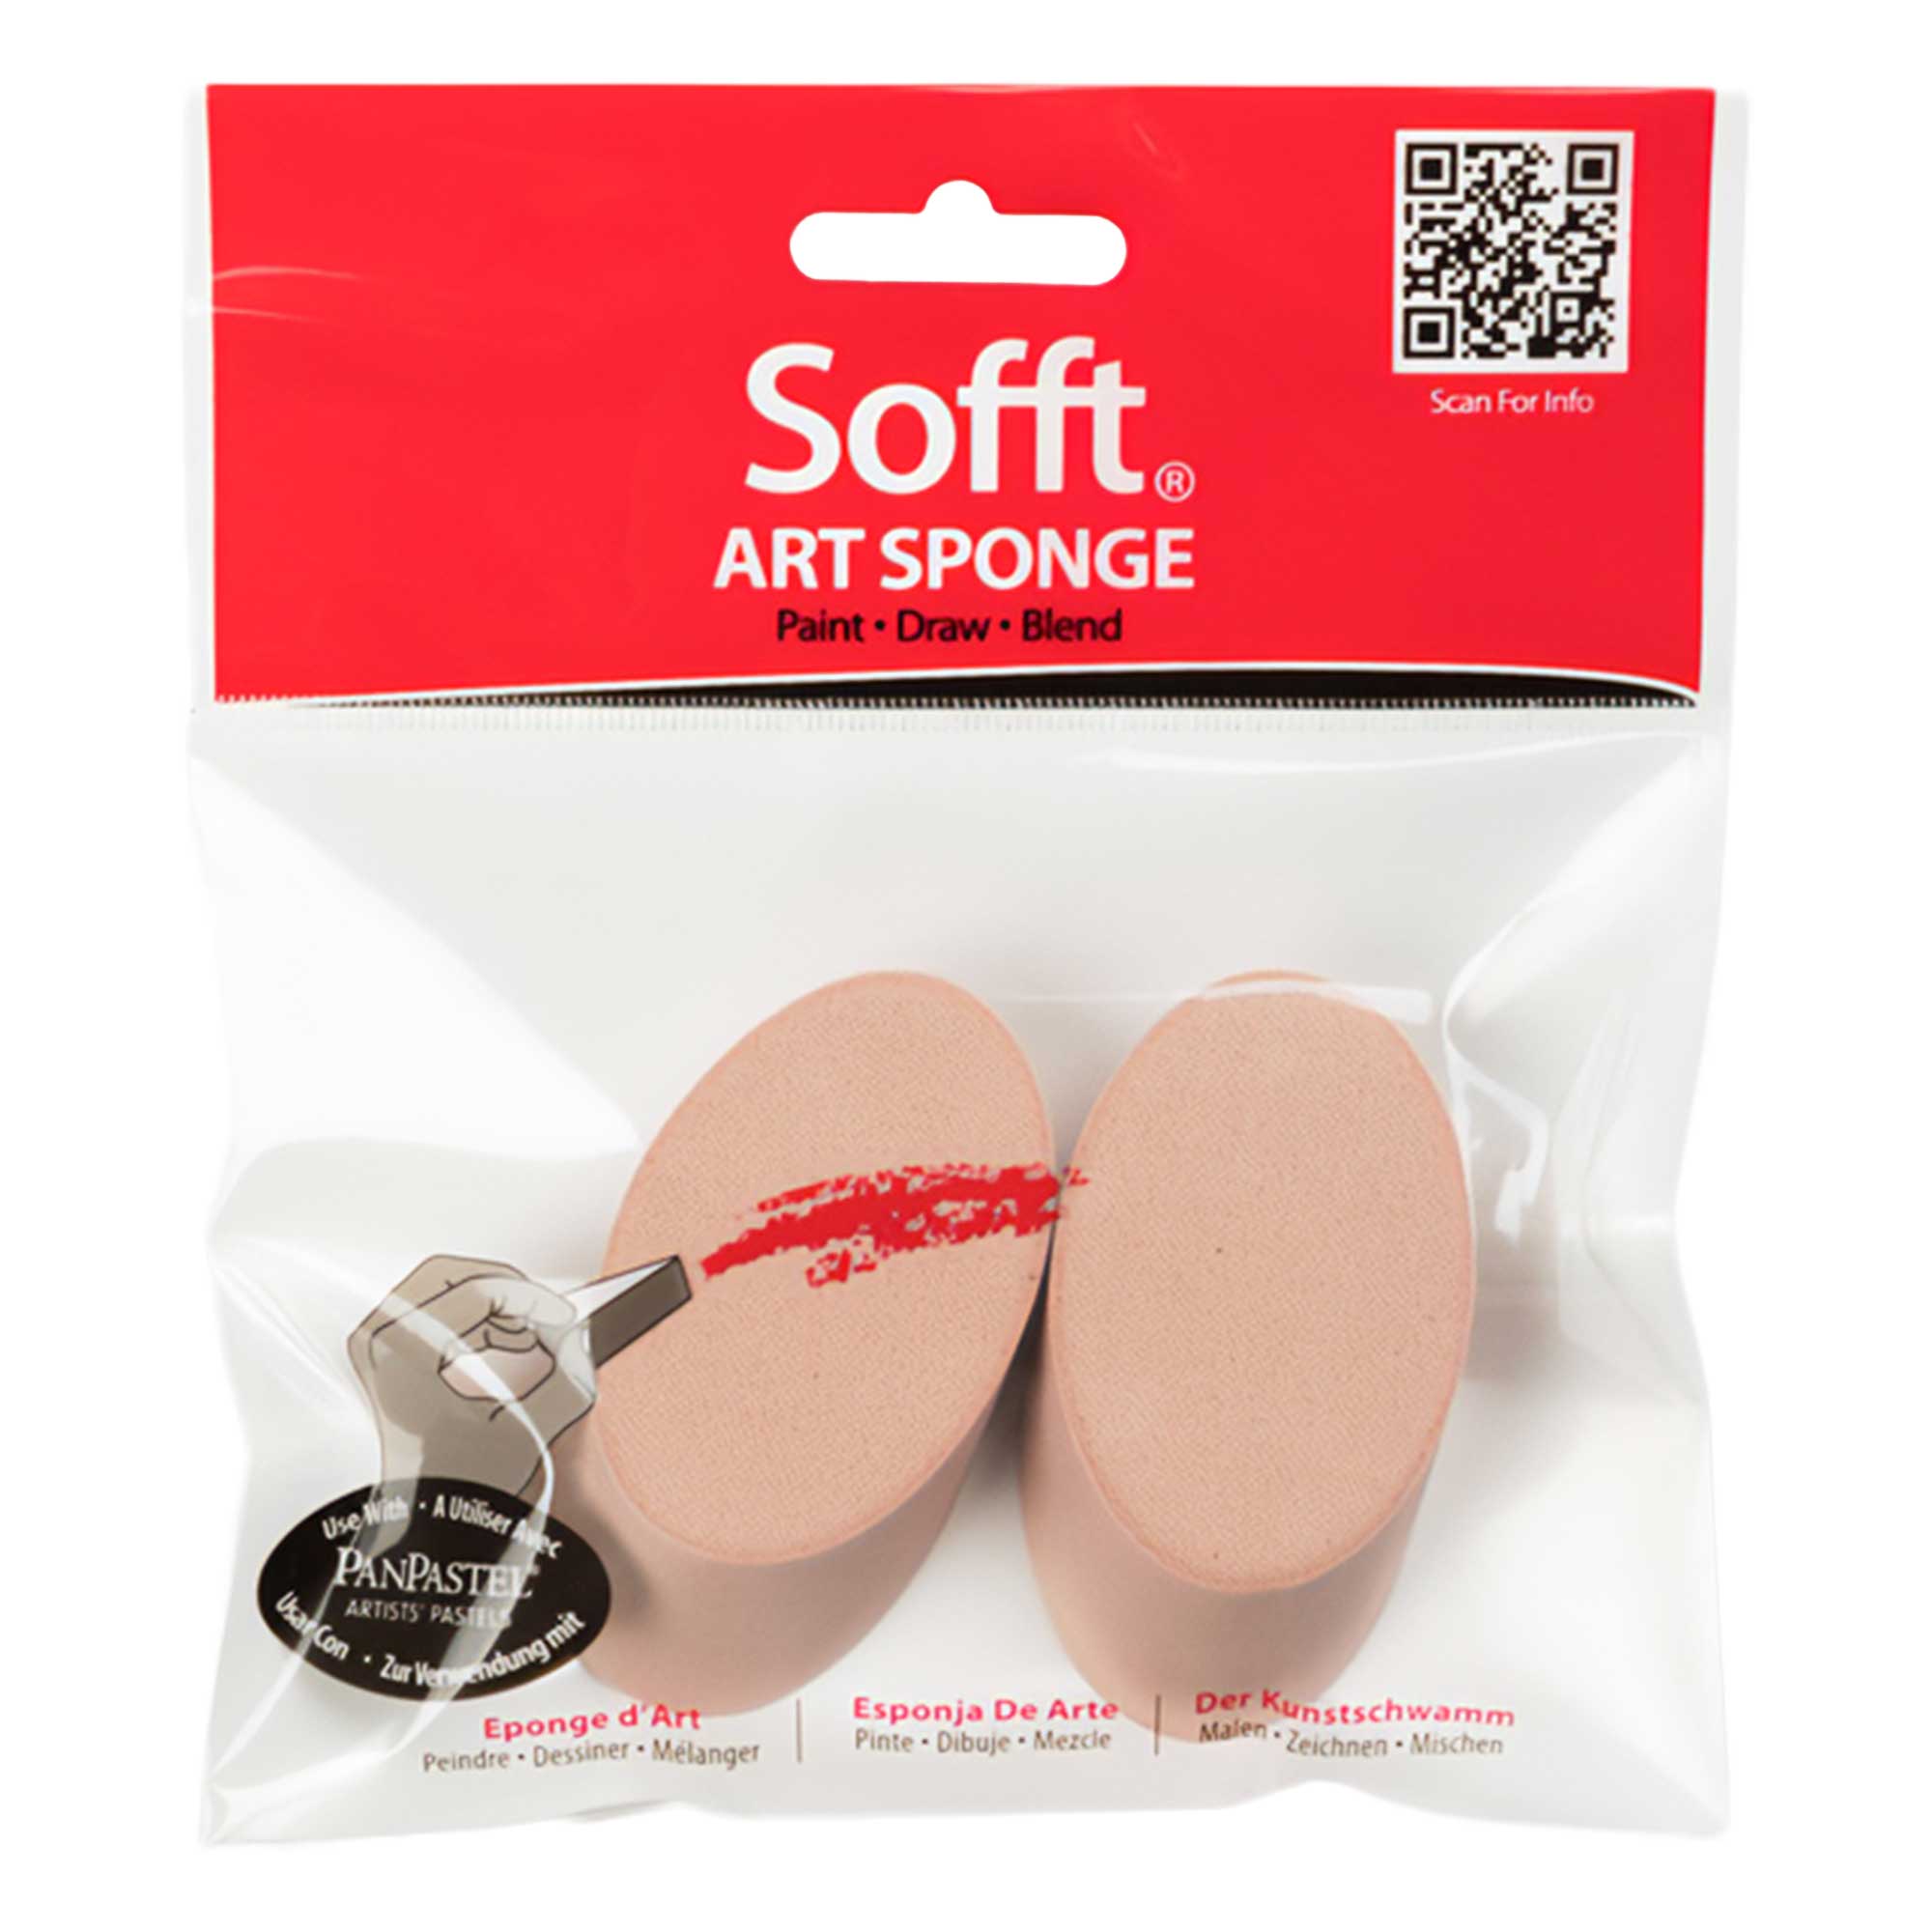 Pan Pastel - Sofft Angle Slice: Round Sponge in Packaging